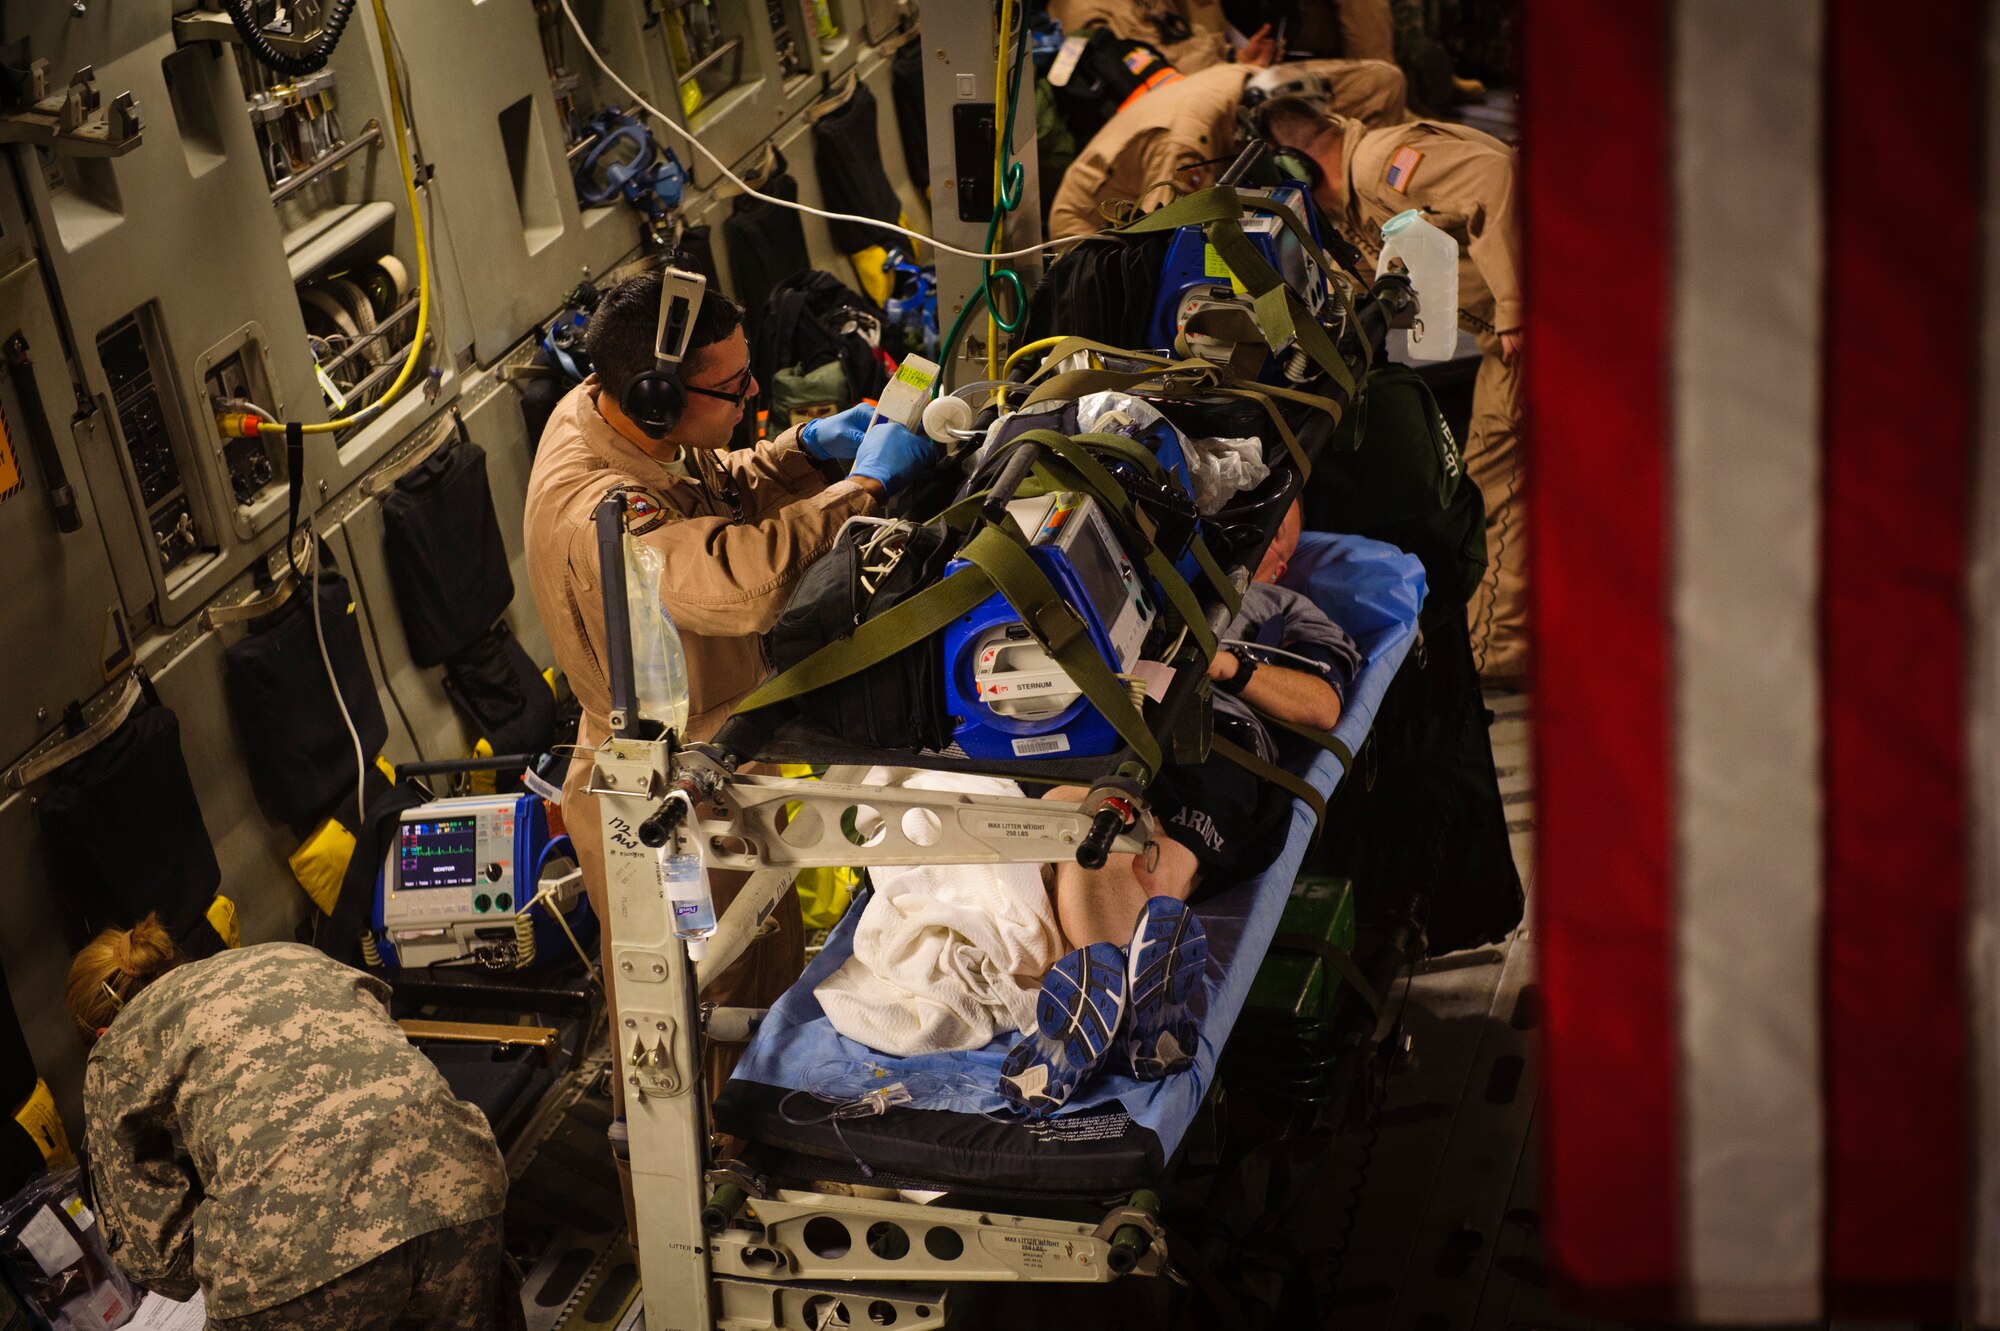 SOUTHWEST ASIA – First Lt. Eric Rodriguez, 379th Expeditionary Aeromedical Evacuation Squadron nurse, checks on a patient’s medical equipment during an evacuation flight to Landstuhl Regional Medical Center, Germany, April 25, 2012. (U.S. Air Force photo/Staff Sgt. Nathanael Callon)